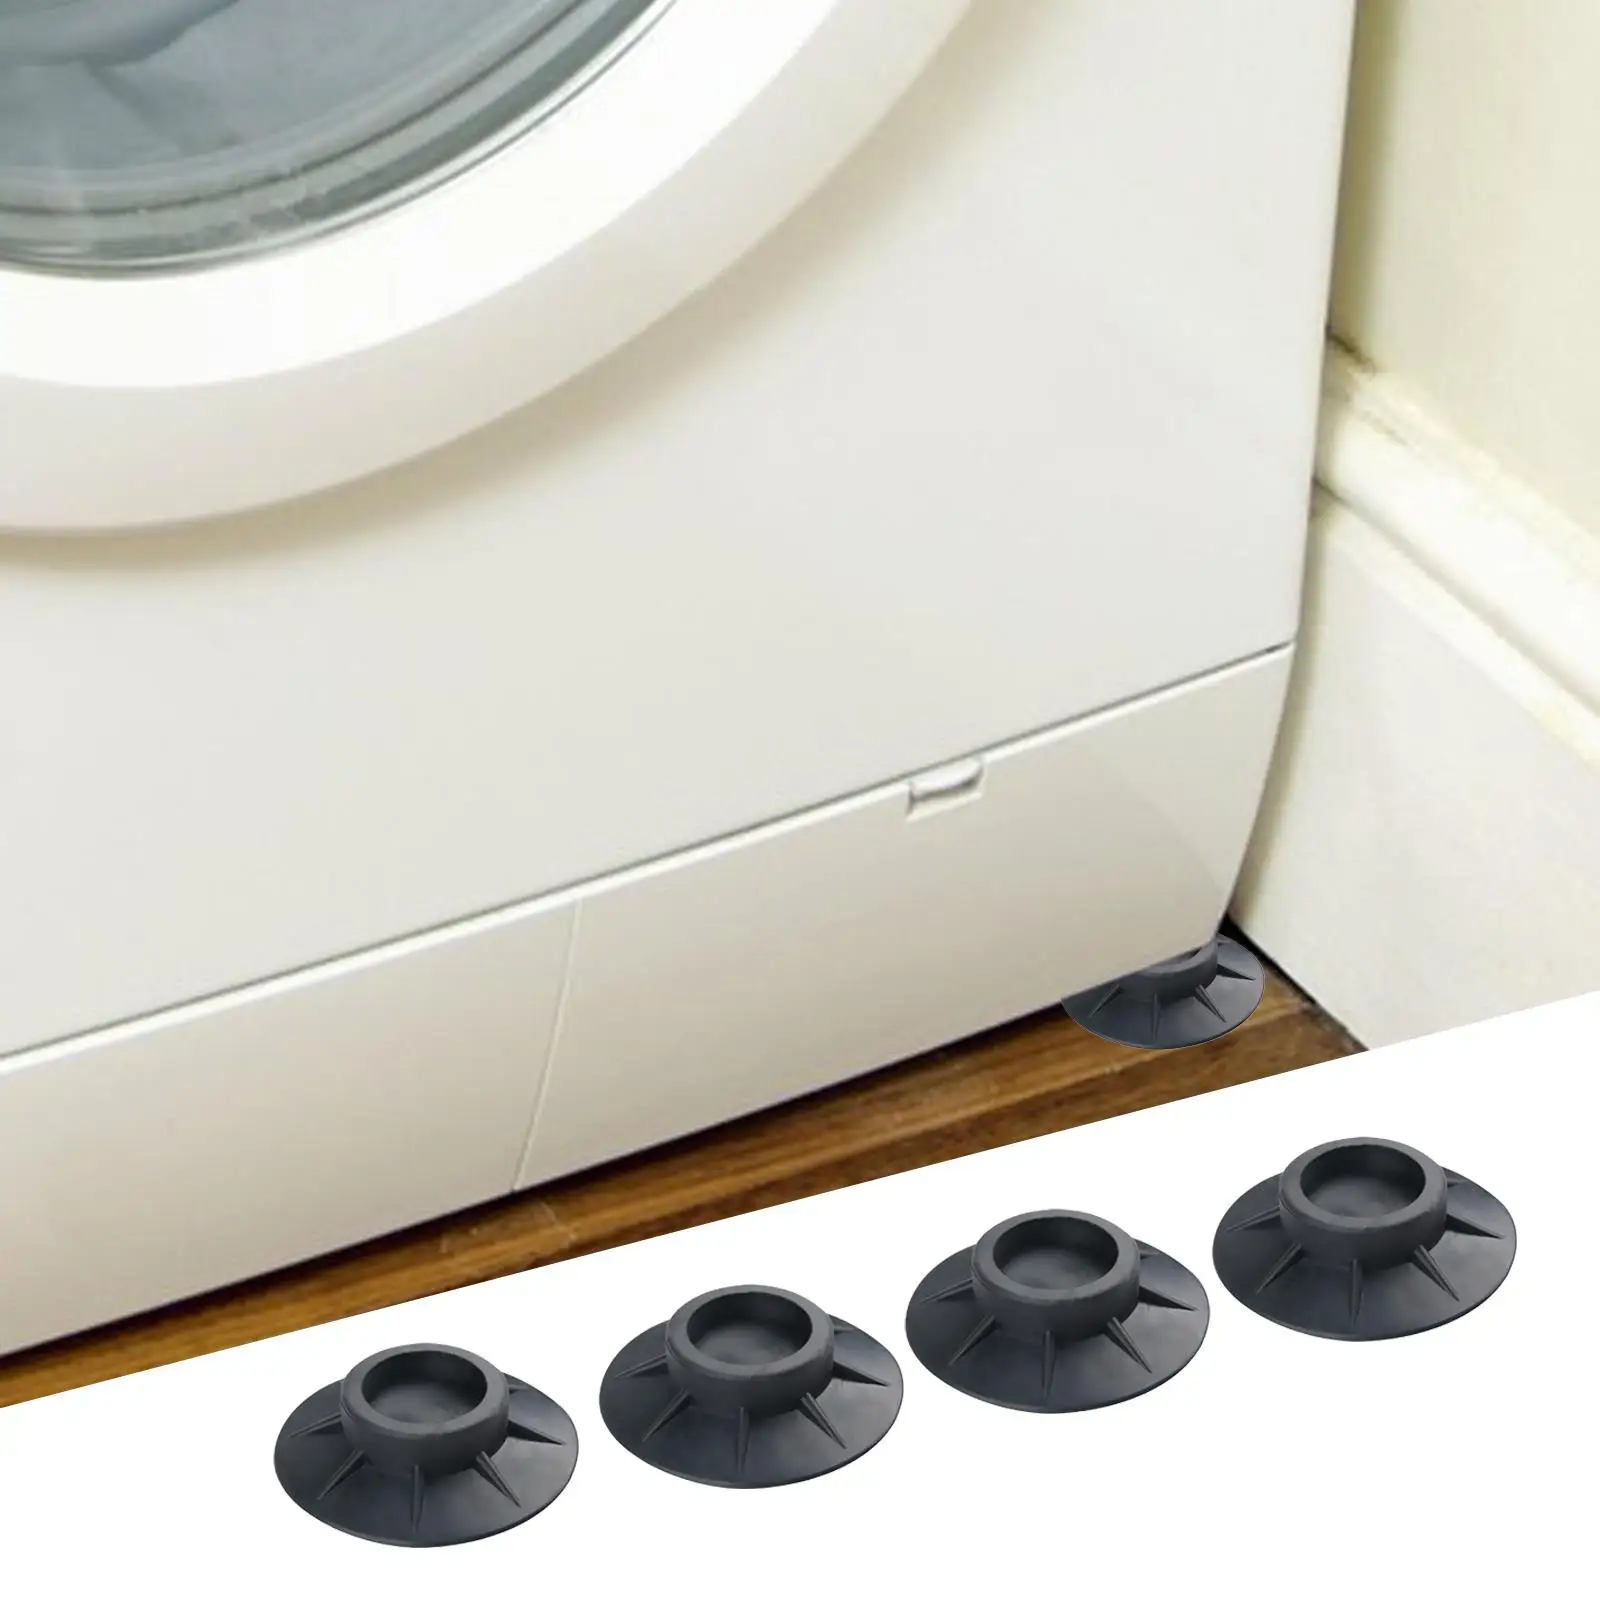 4 Pieces Non-Slip Pad of Washing Machine Rubber Stand Covers for Dishwashers